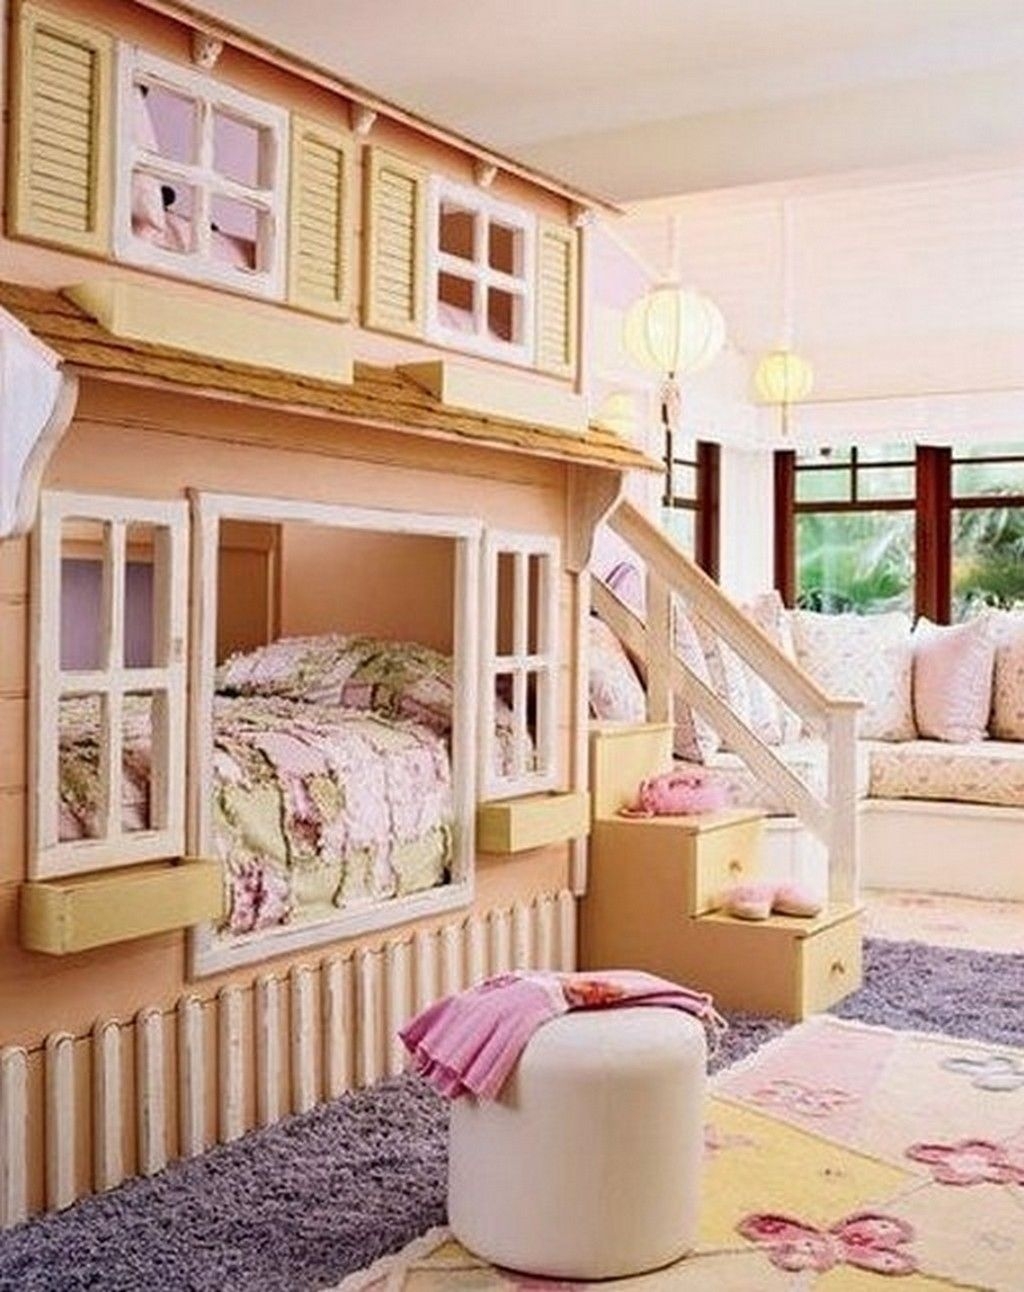 Dollhouse bunk beds for sale